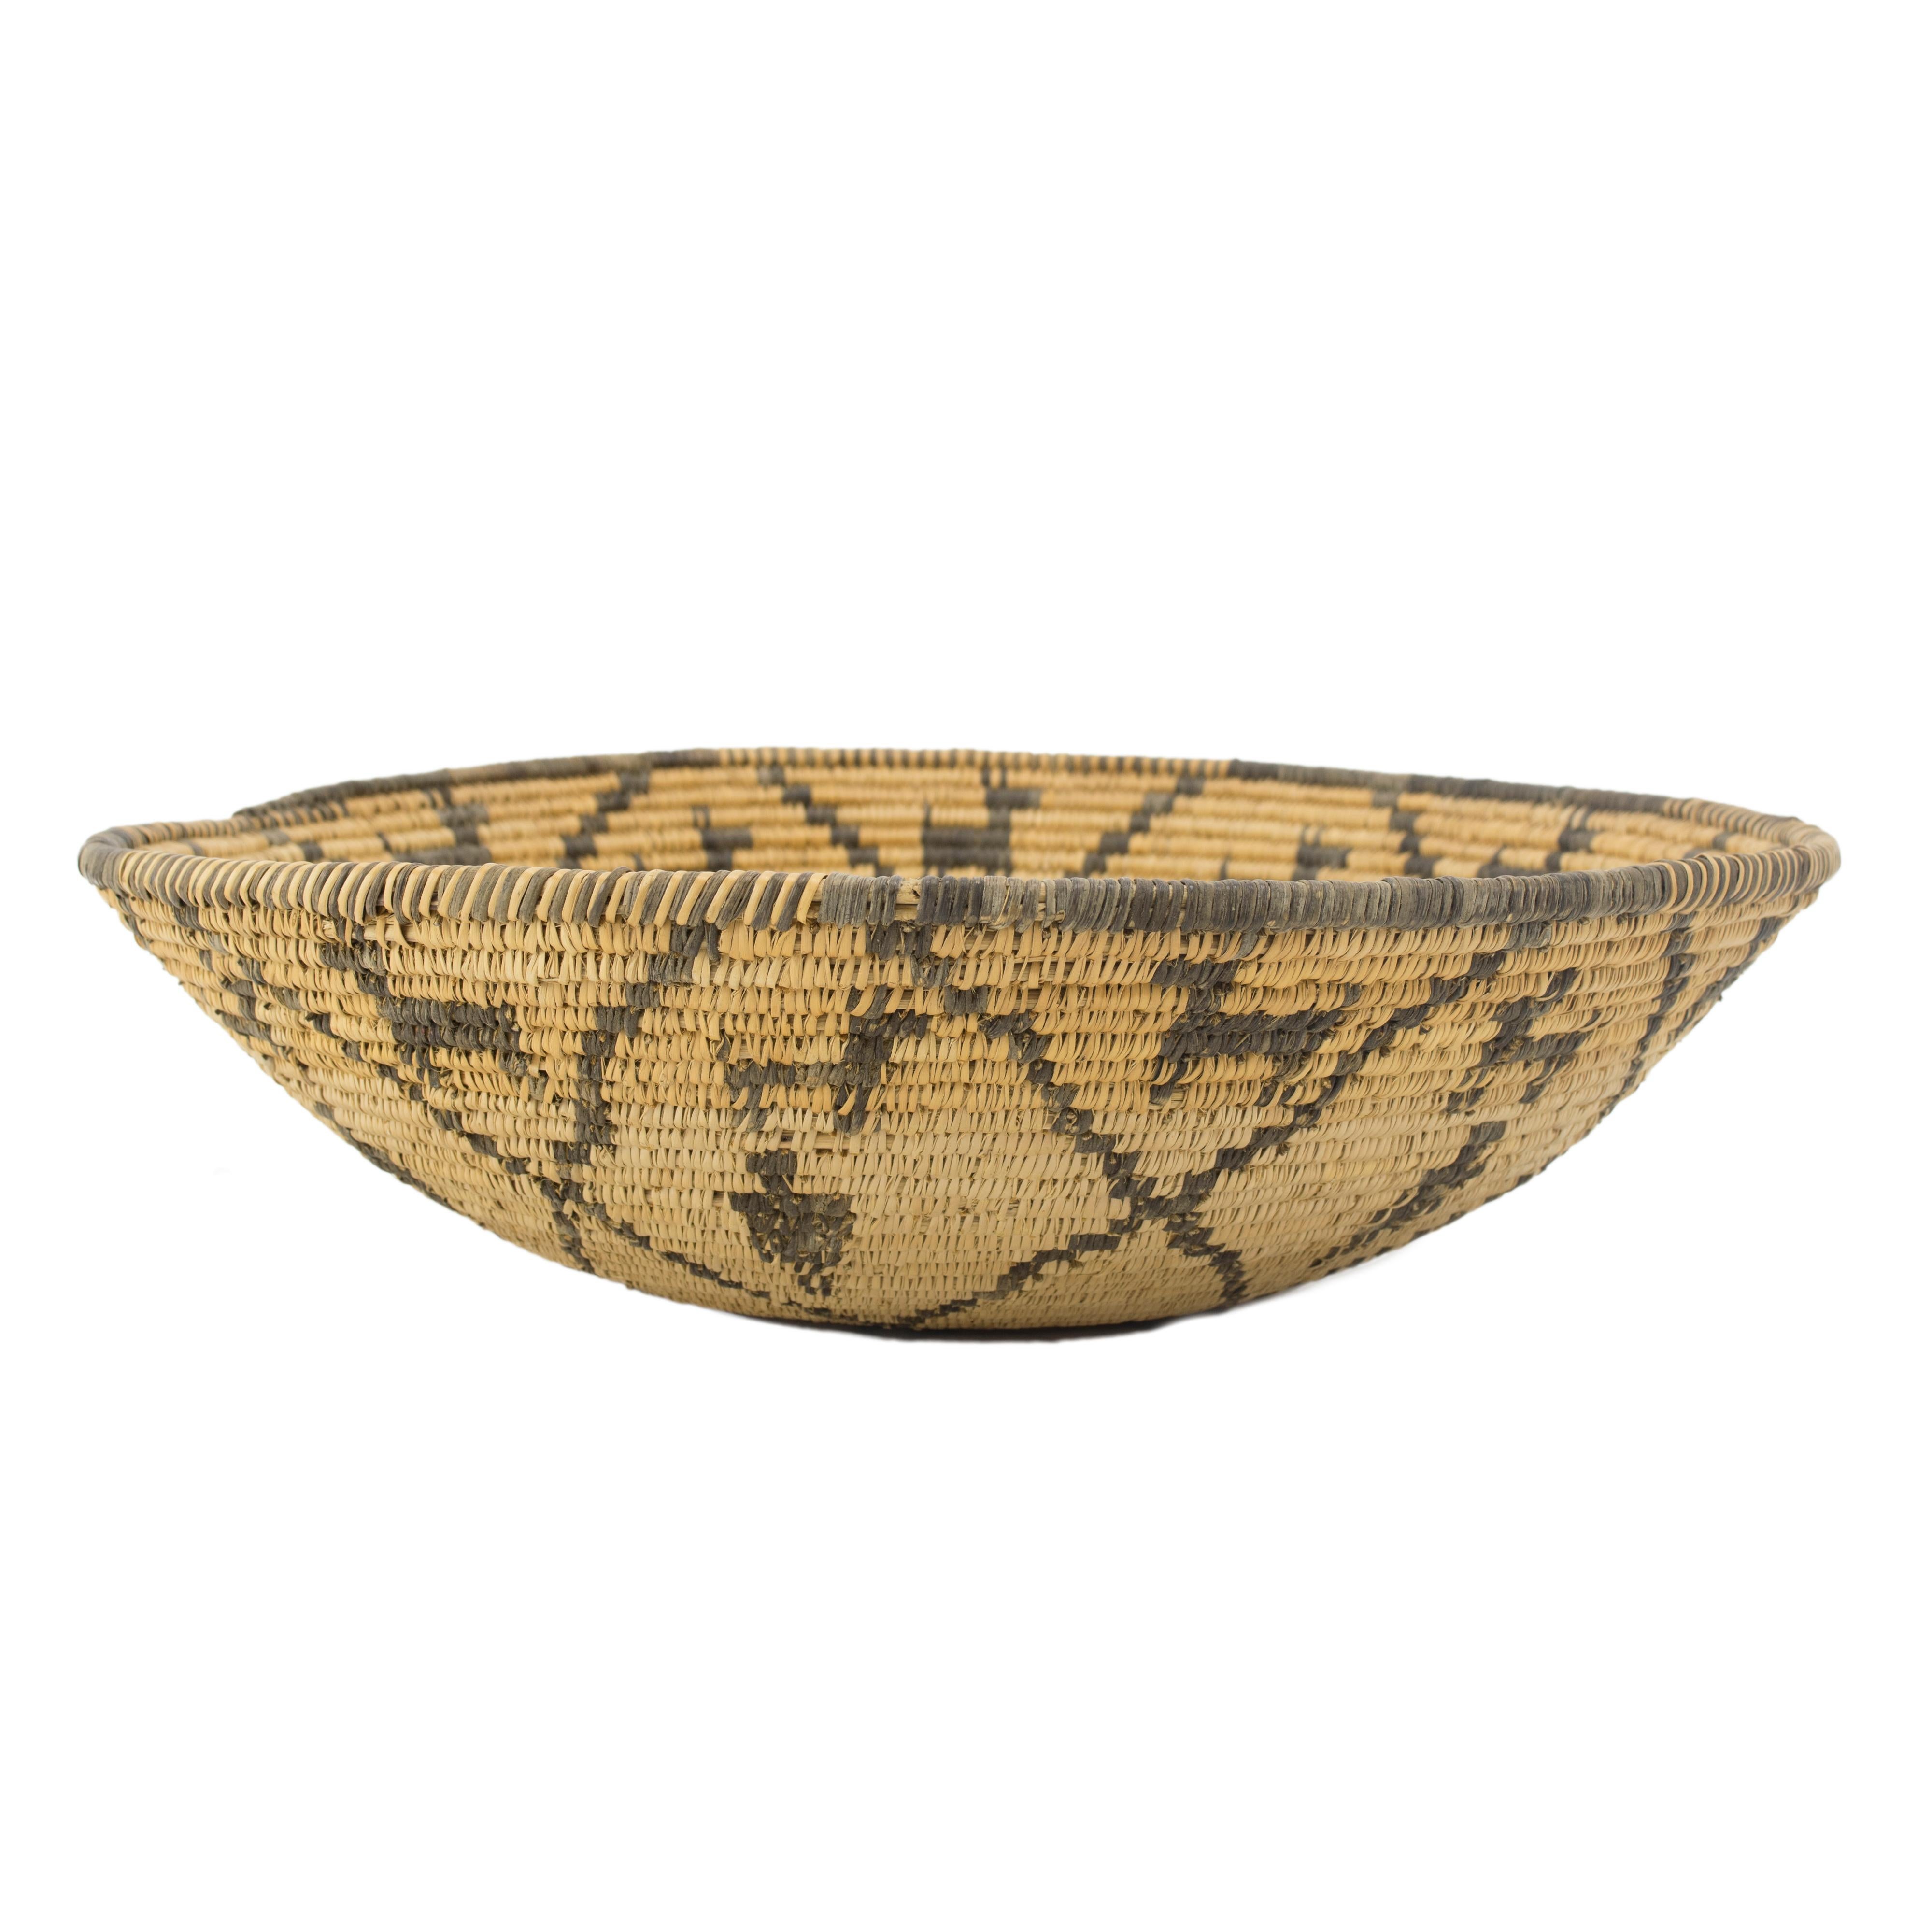 Apache pictorial bowl with dogs and man figures with center squash blossom design.

Period: First quarter 20th century

Origin: Apache

Size: 16